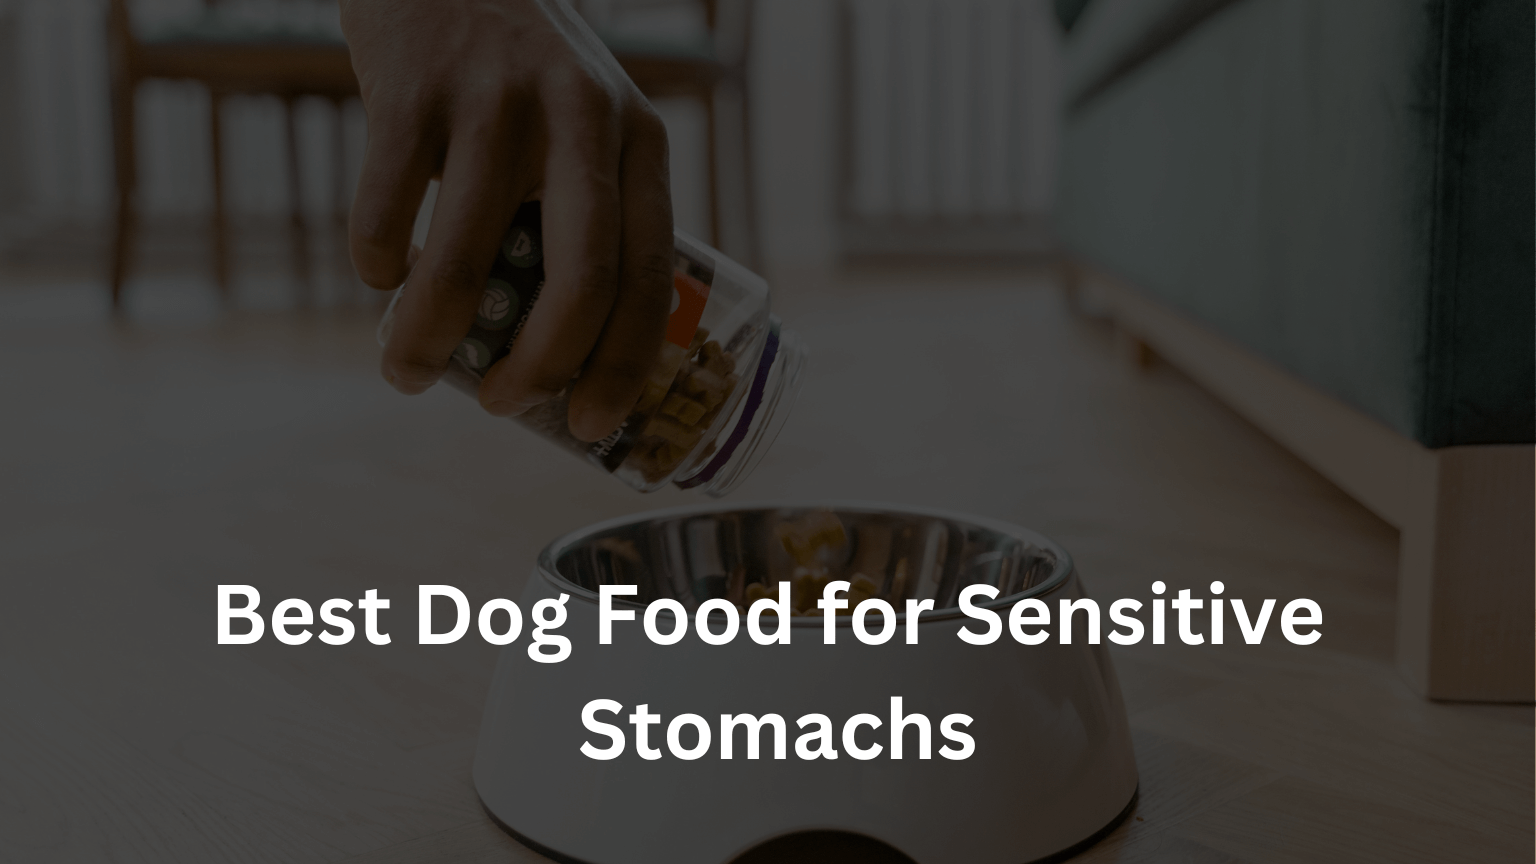 Finding the Perfect Meal: Unraveling the Mystery of the Best Dog Food for Sensitive Stomachs